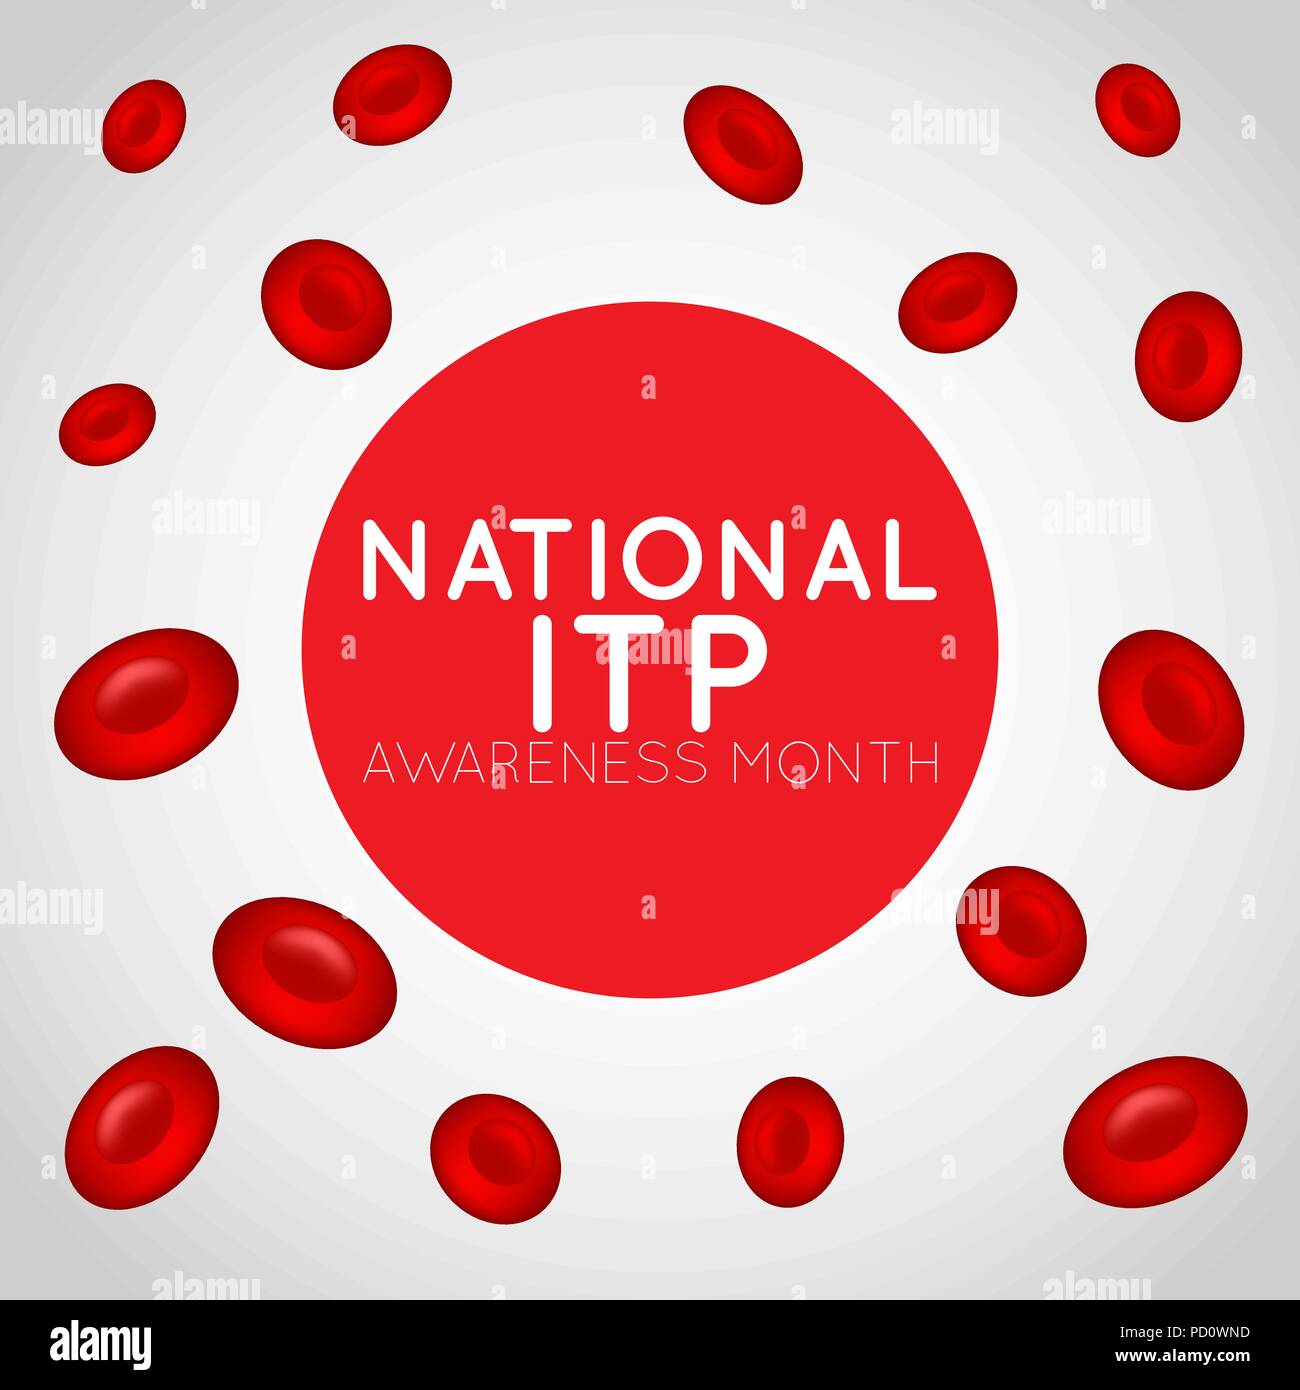 National ITP Awareness Month vector logo icon illustration Stock Vector